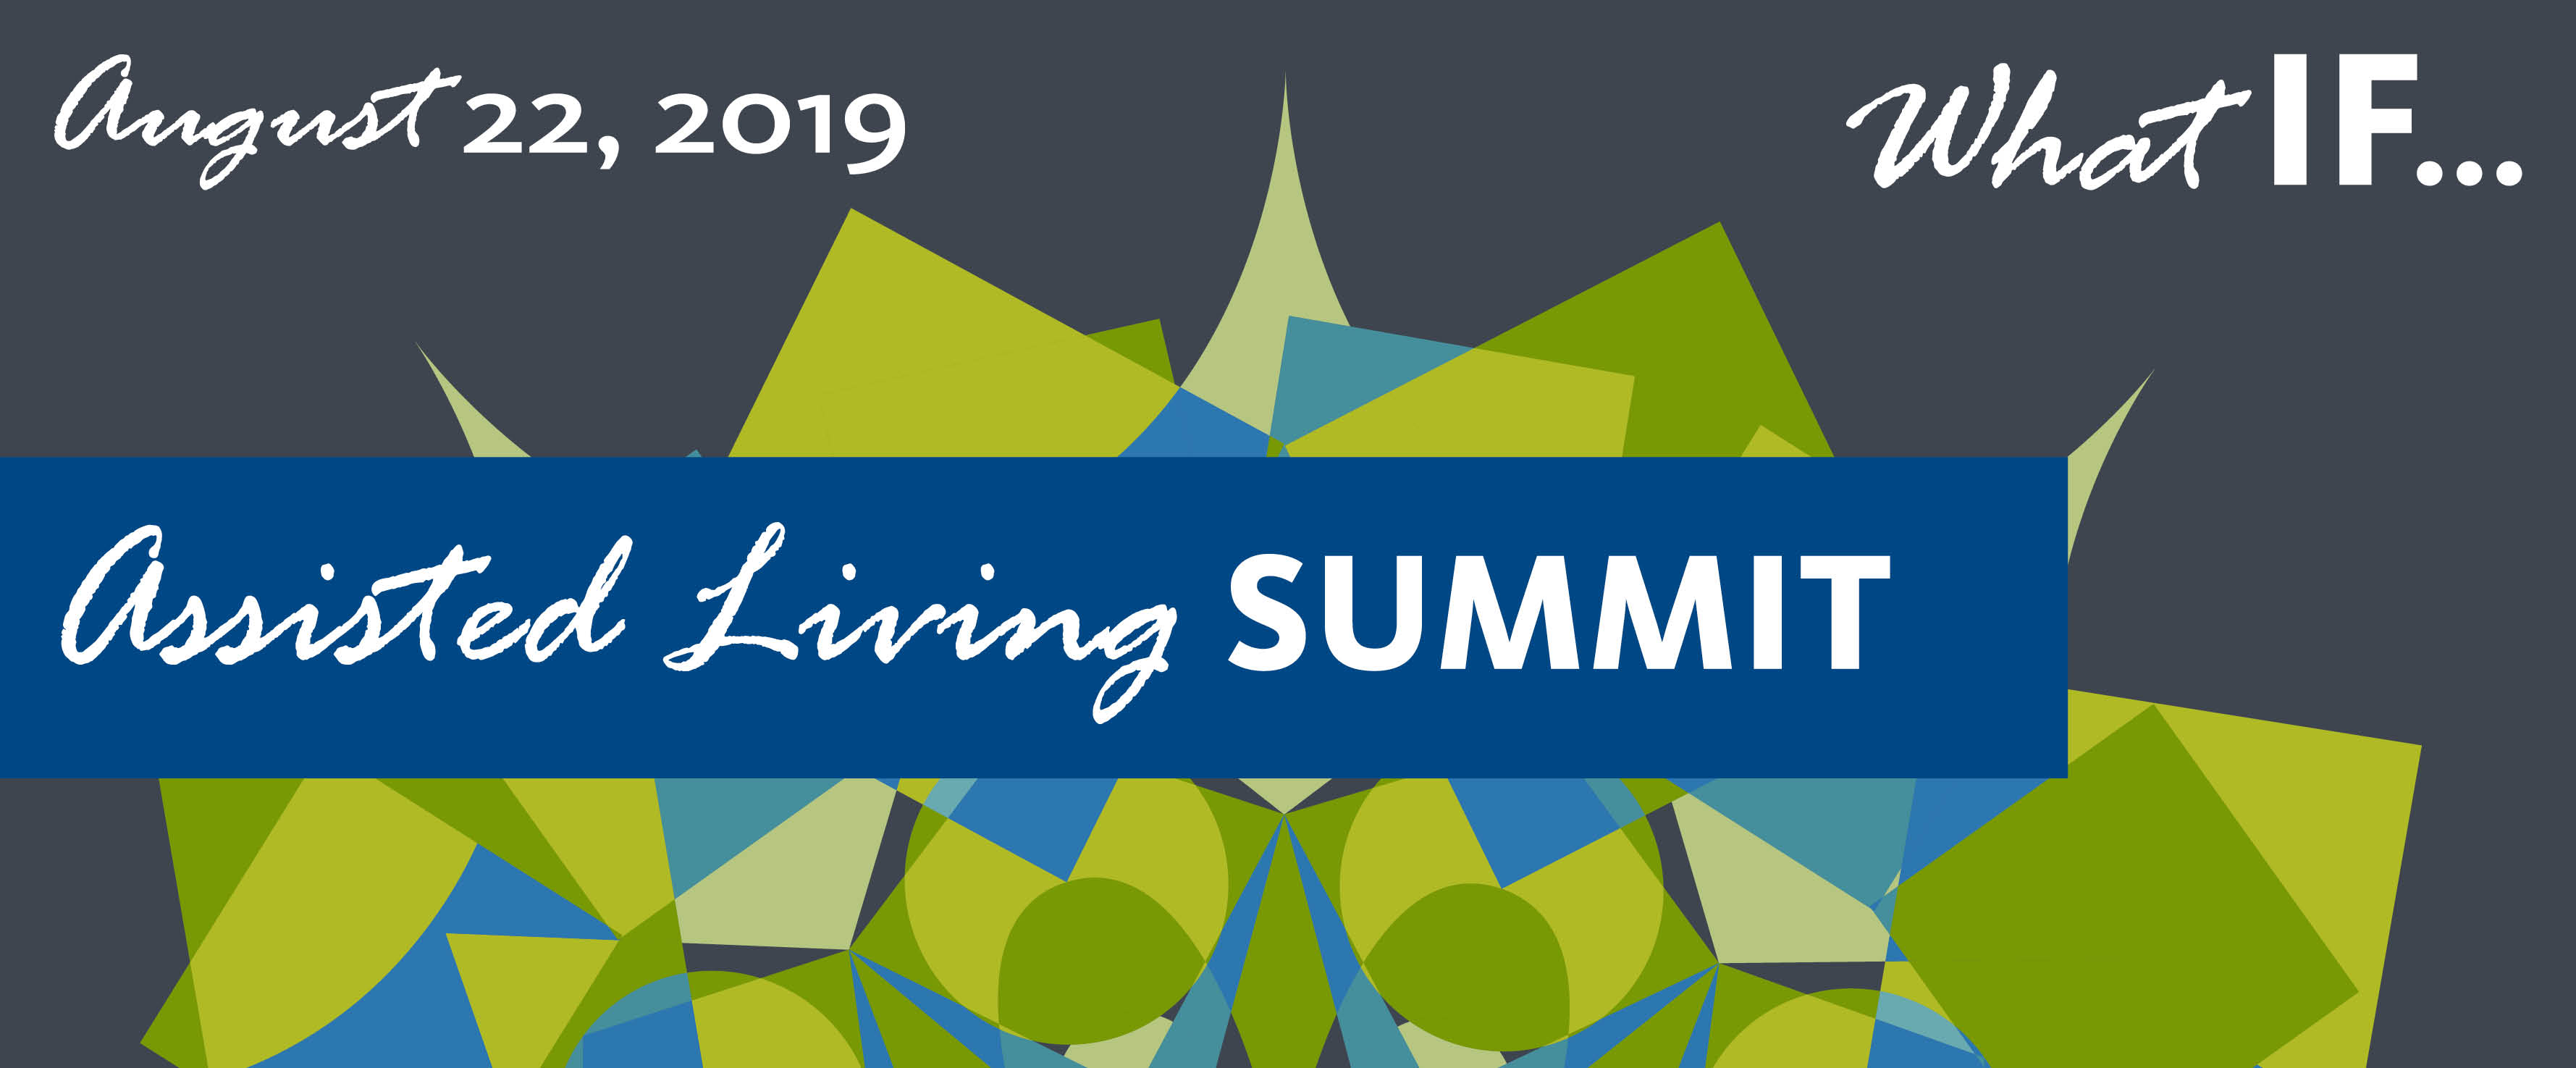 2019 Assisted Living Summit